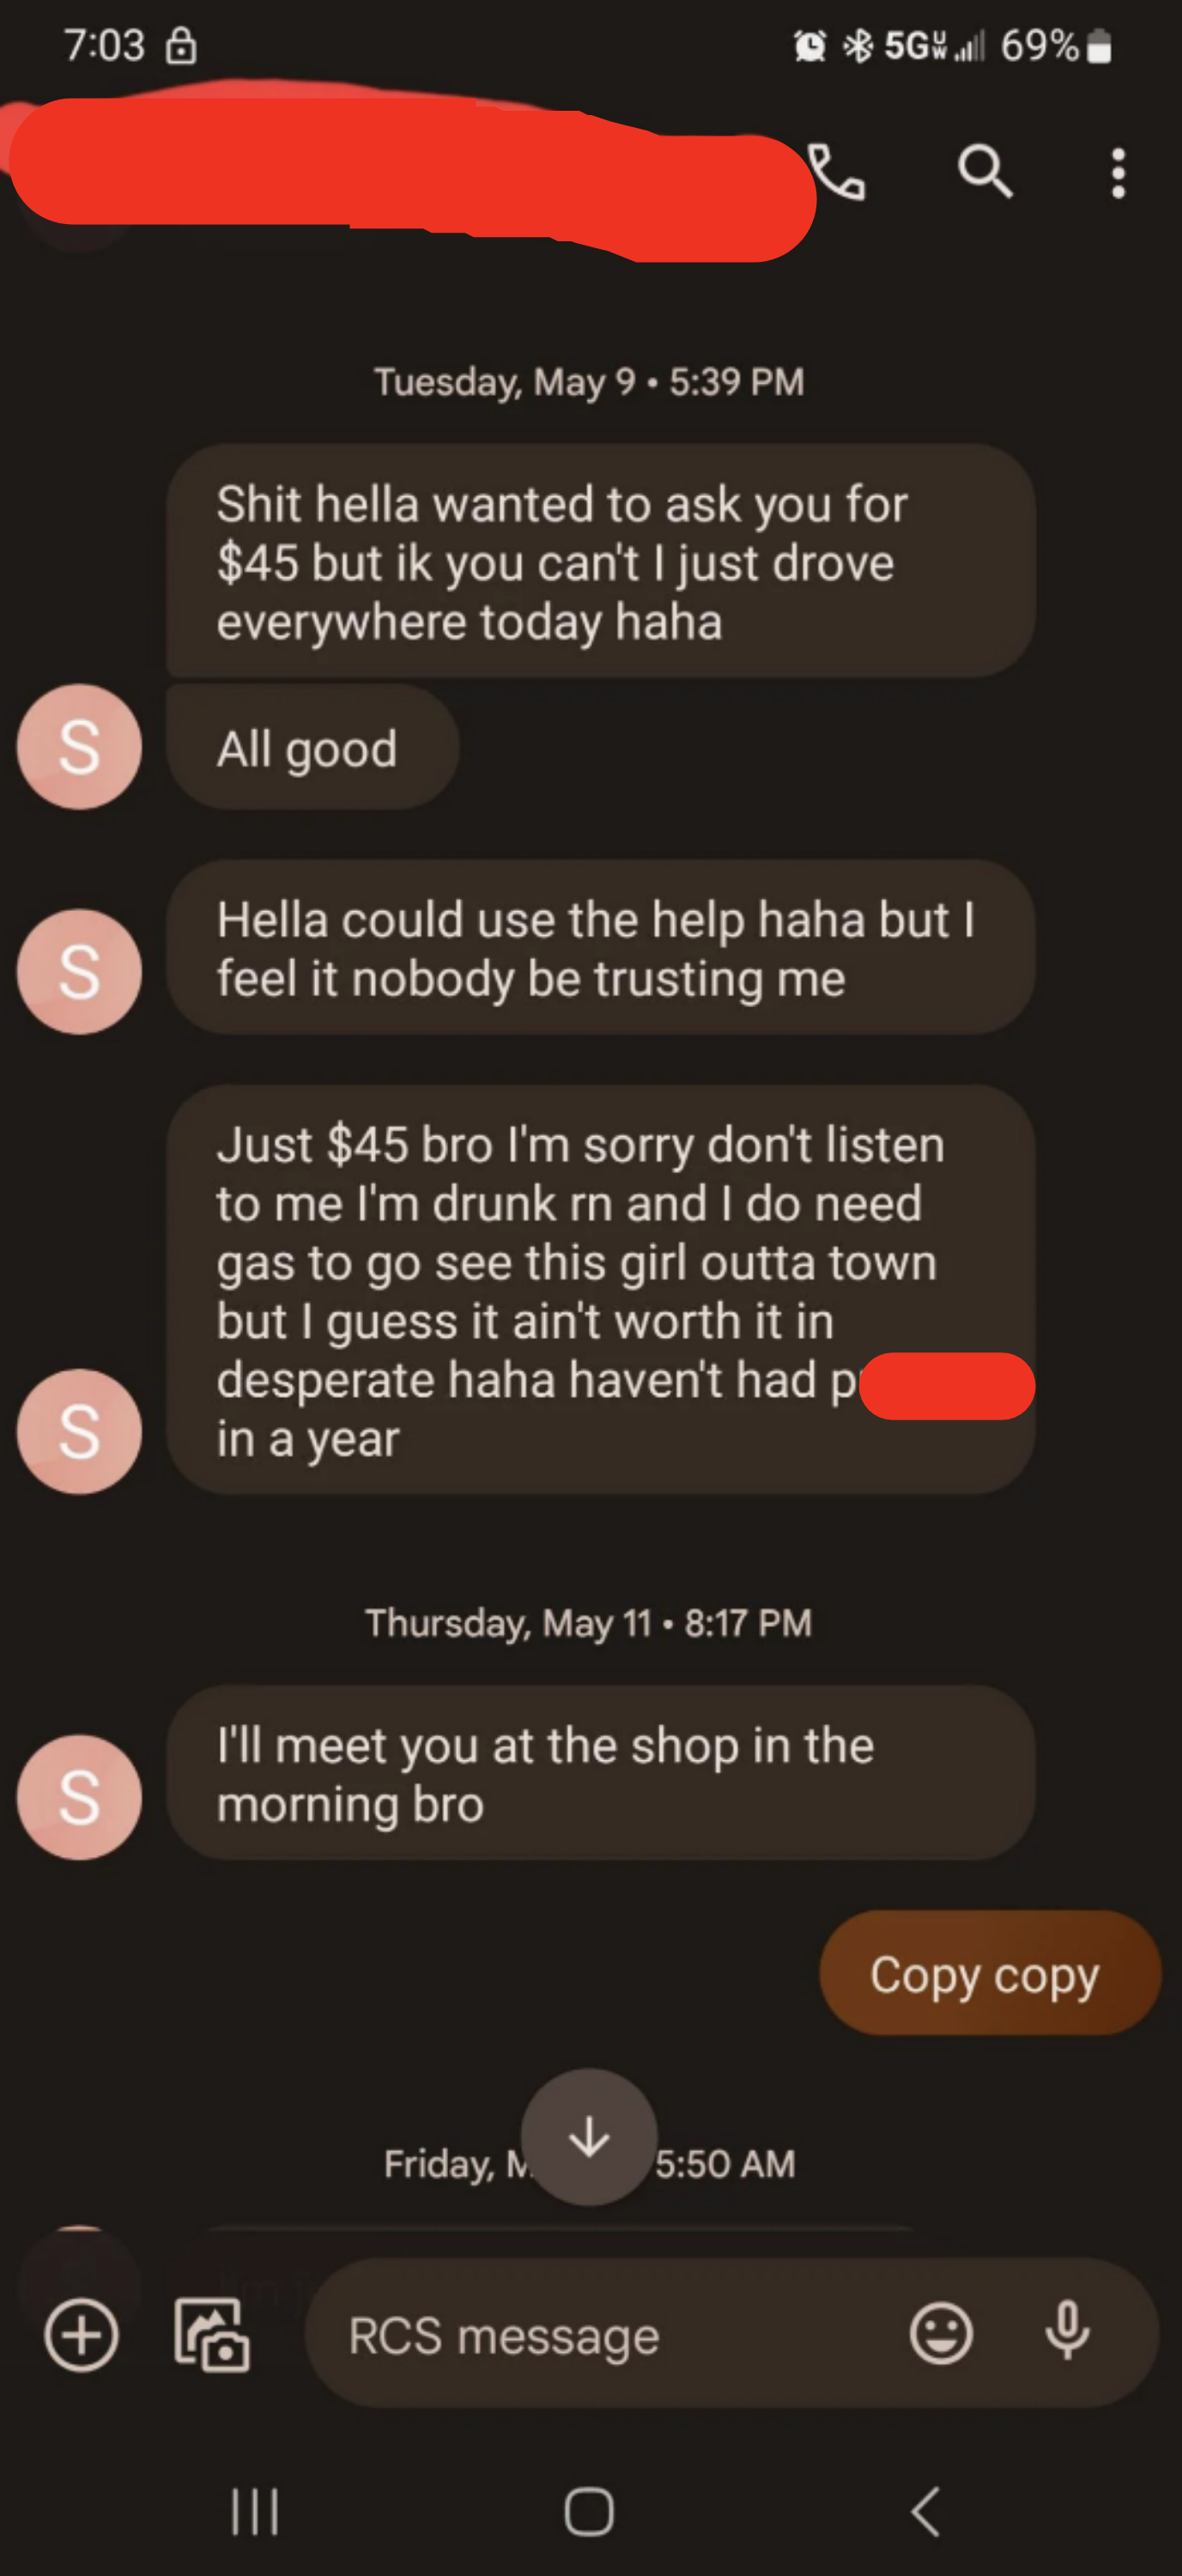 The coworker asks for $45 twice, saying they need gas to visit a girl because they haven&#x27;t had sex in a while